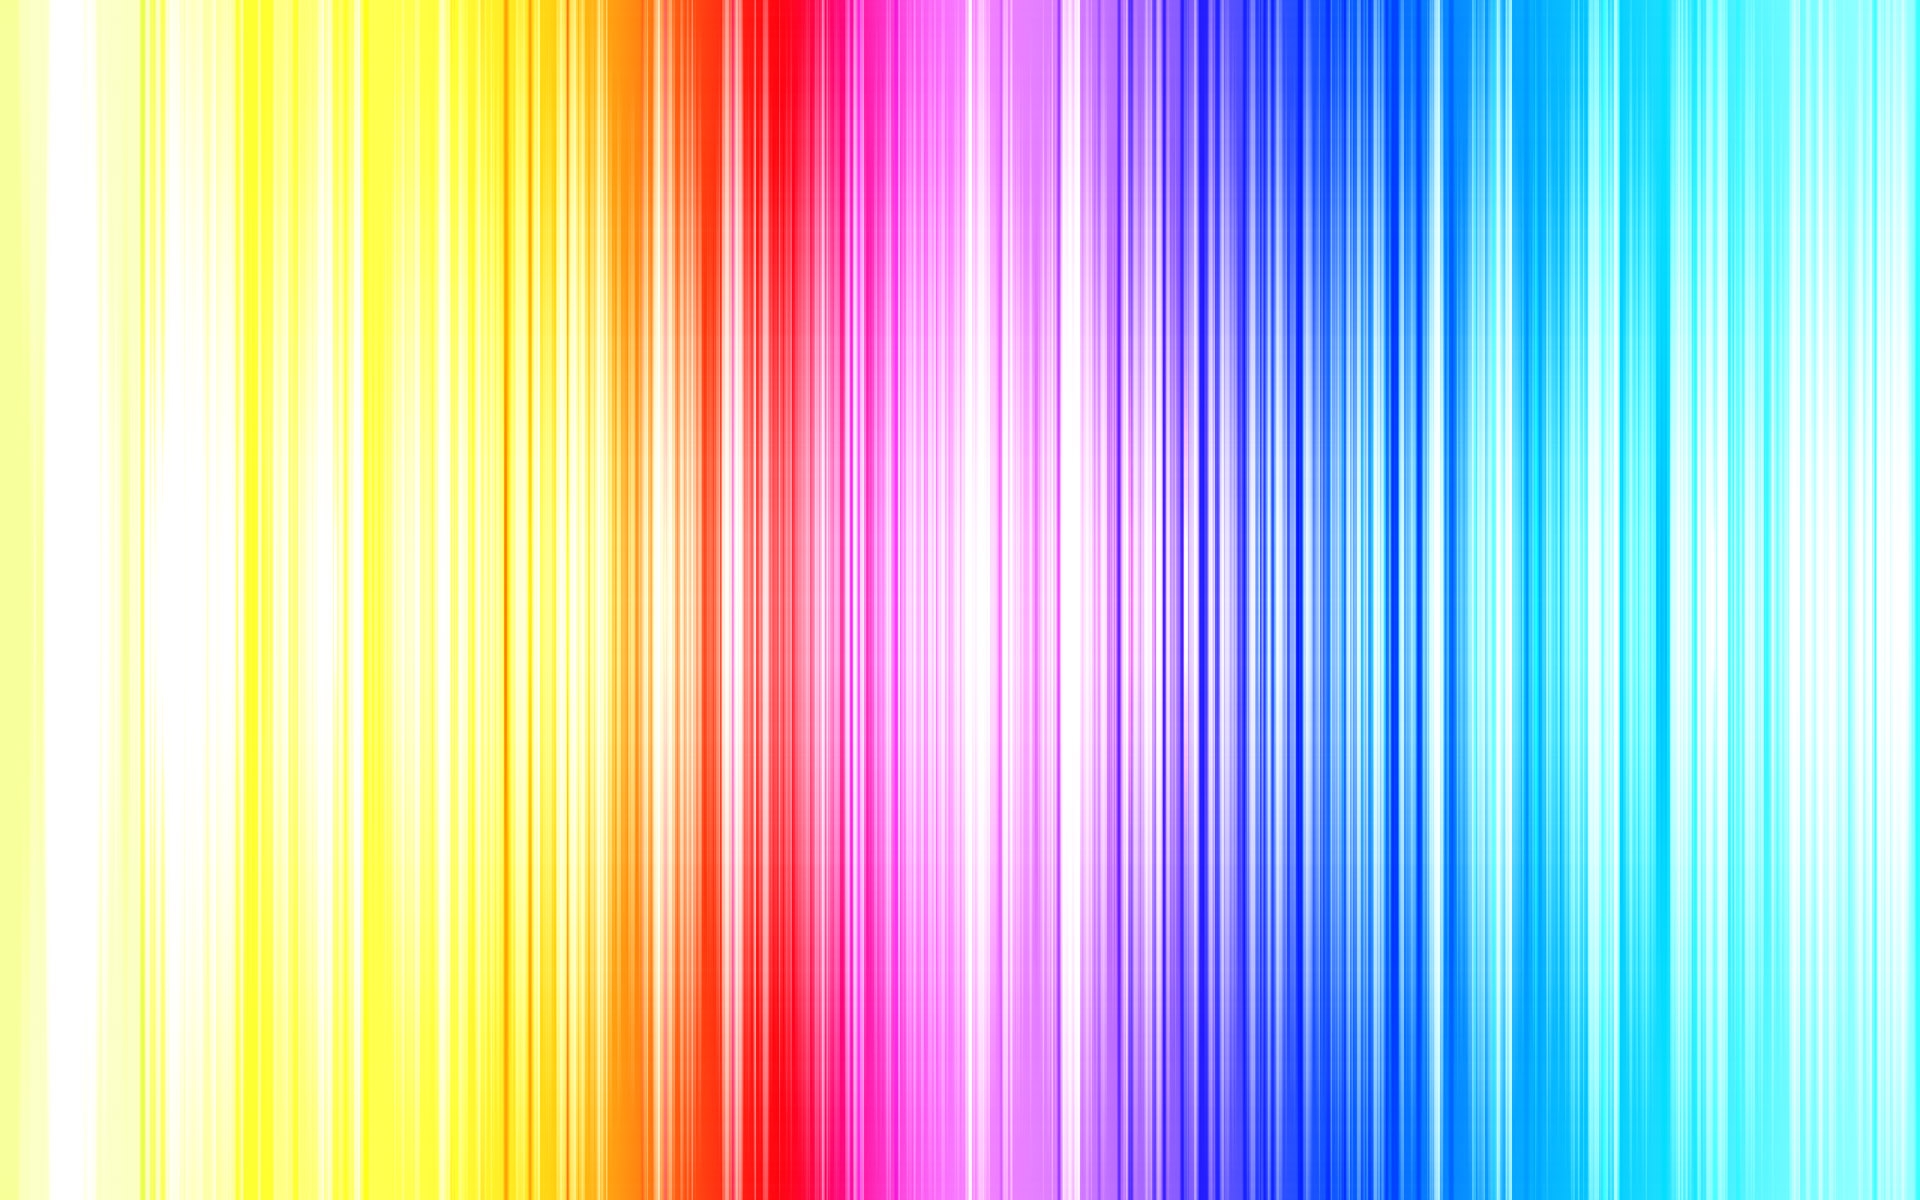 These Wallpaper Are So Colorful Even More Than